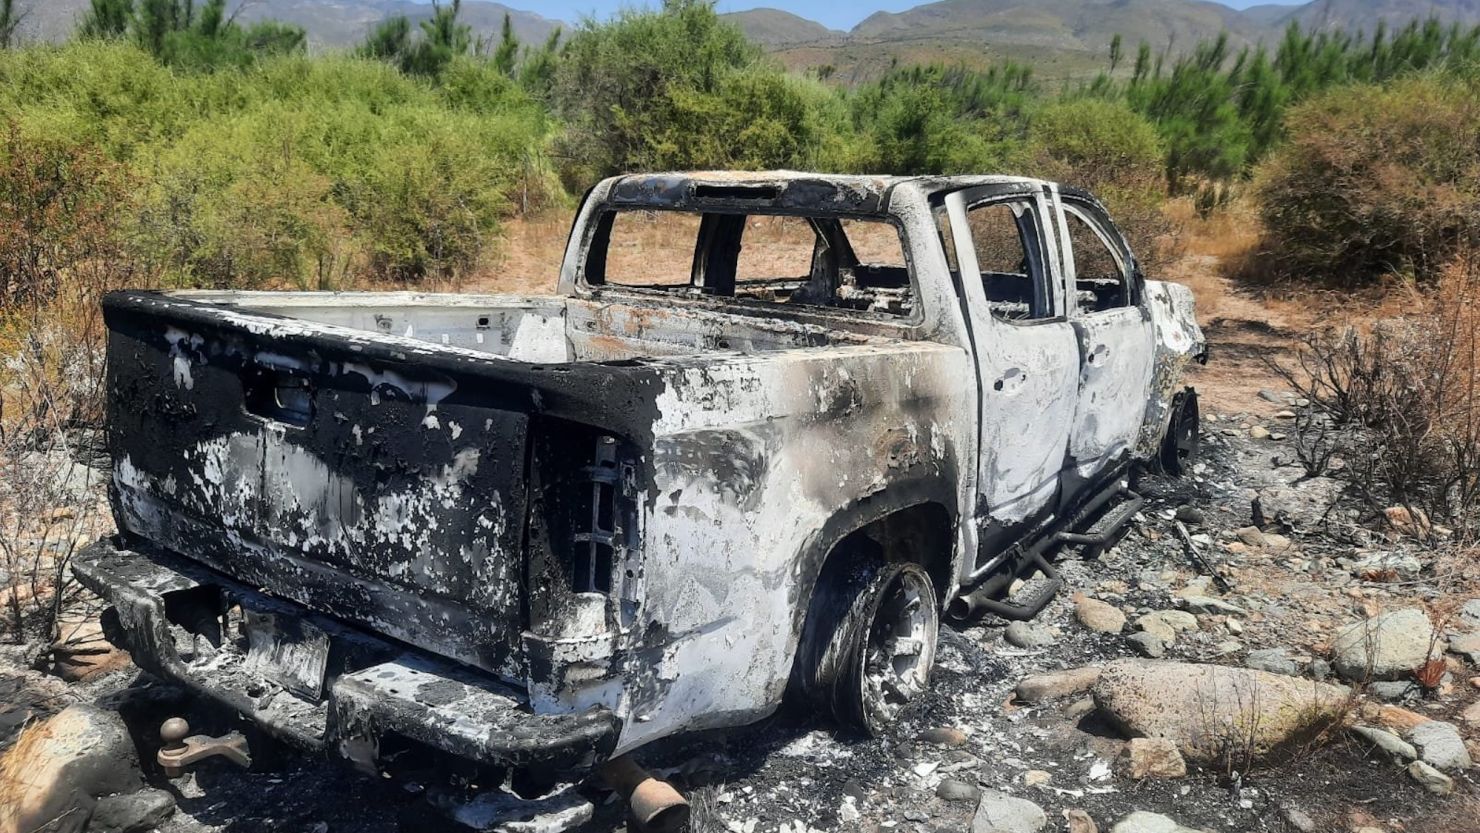 A burned-out white pickup truck discovered at a ranch in Santo Tomas is the same car that the two Australians and an American man were driving before they went missing, according to a local police source.